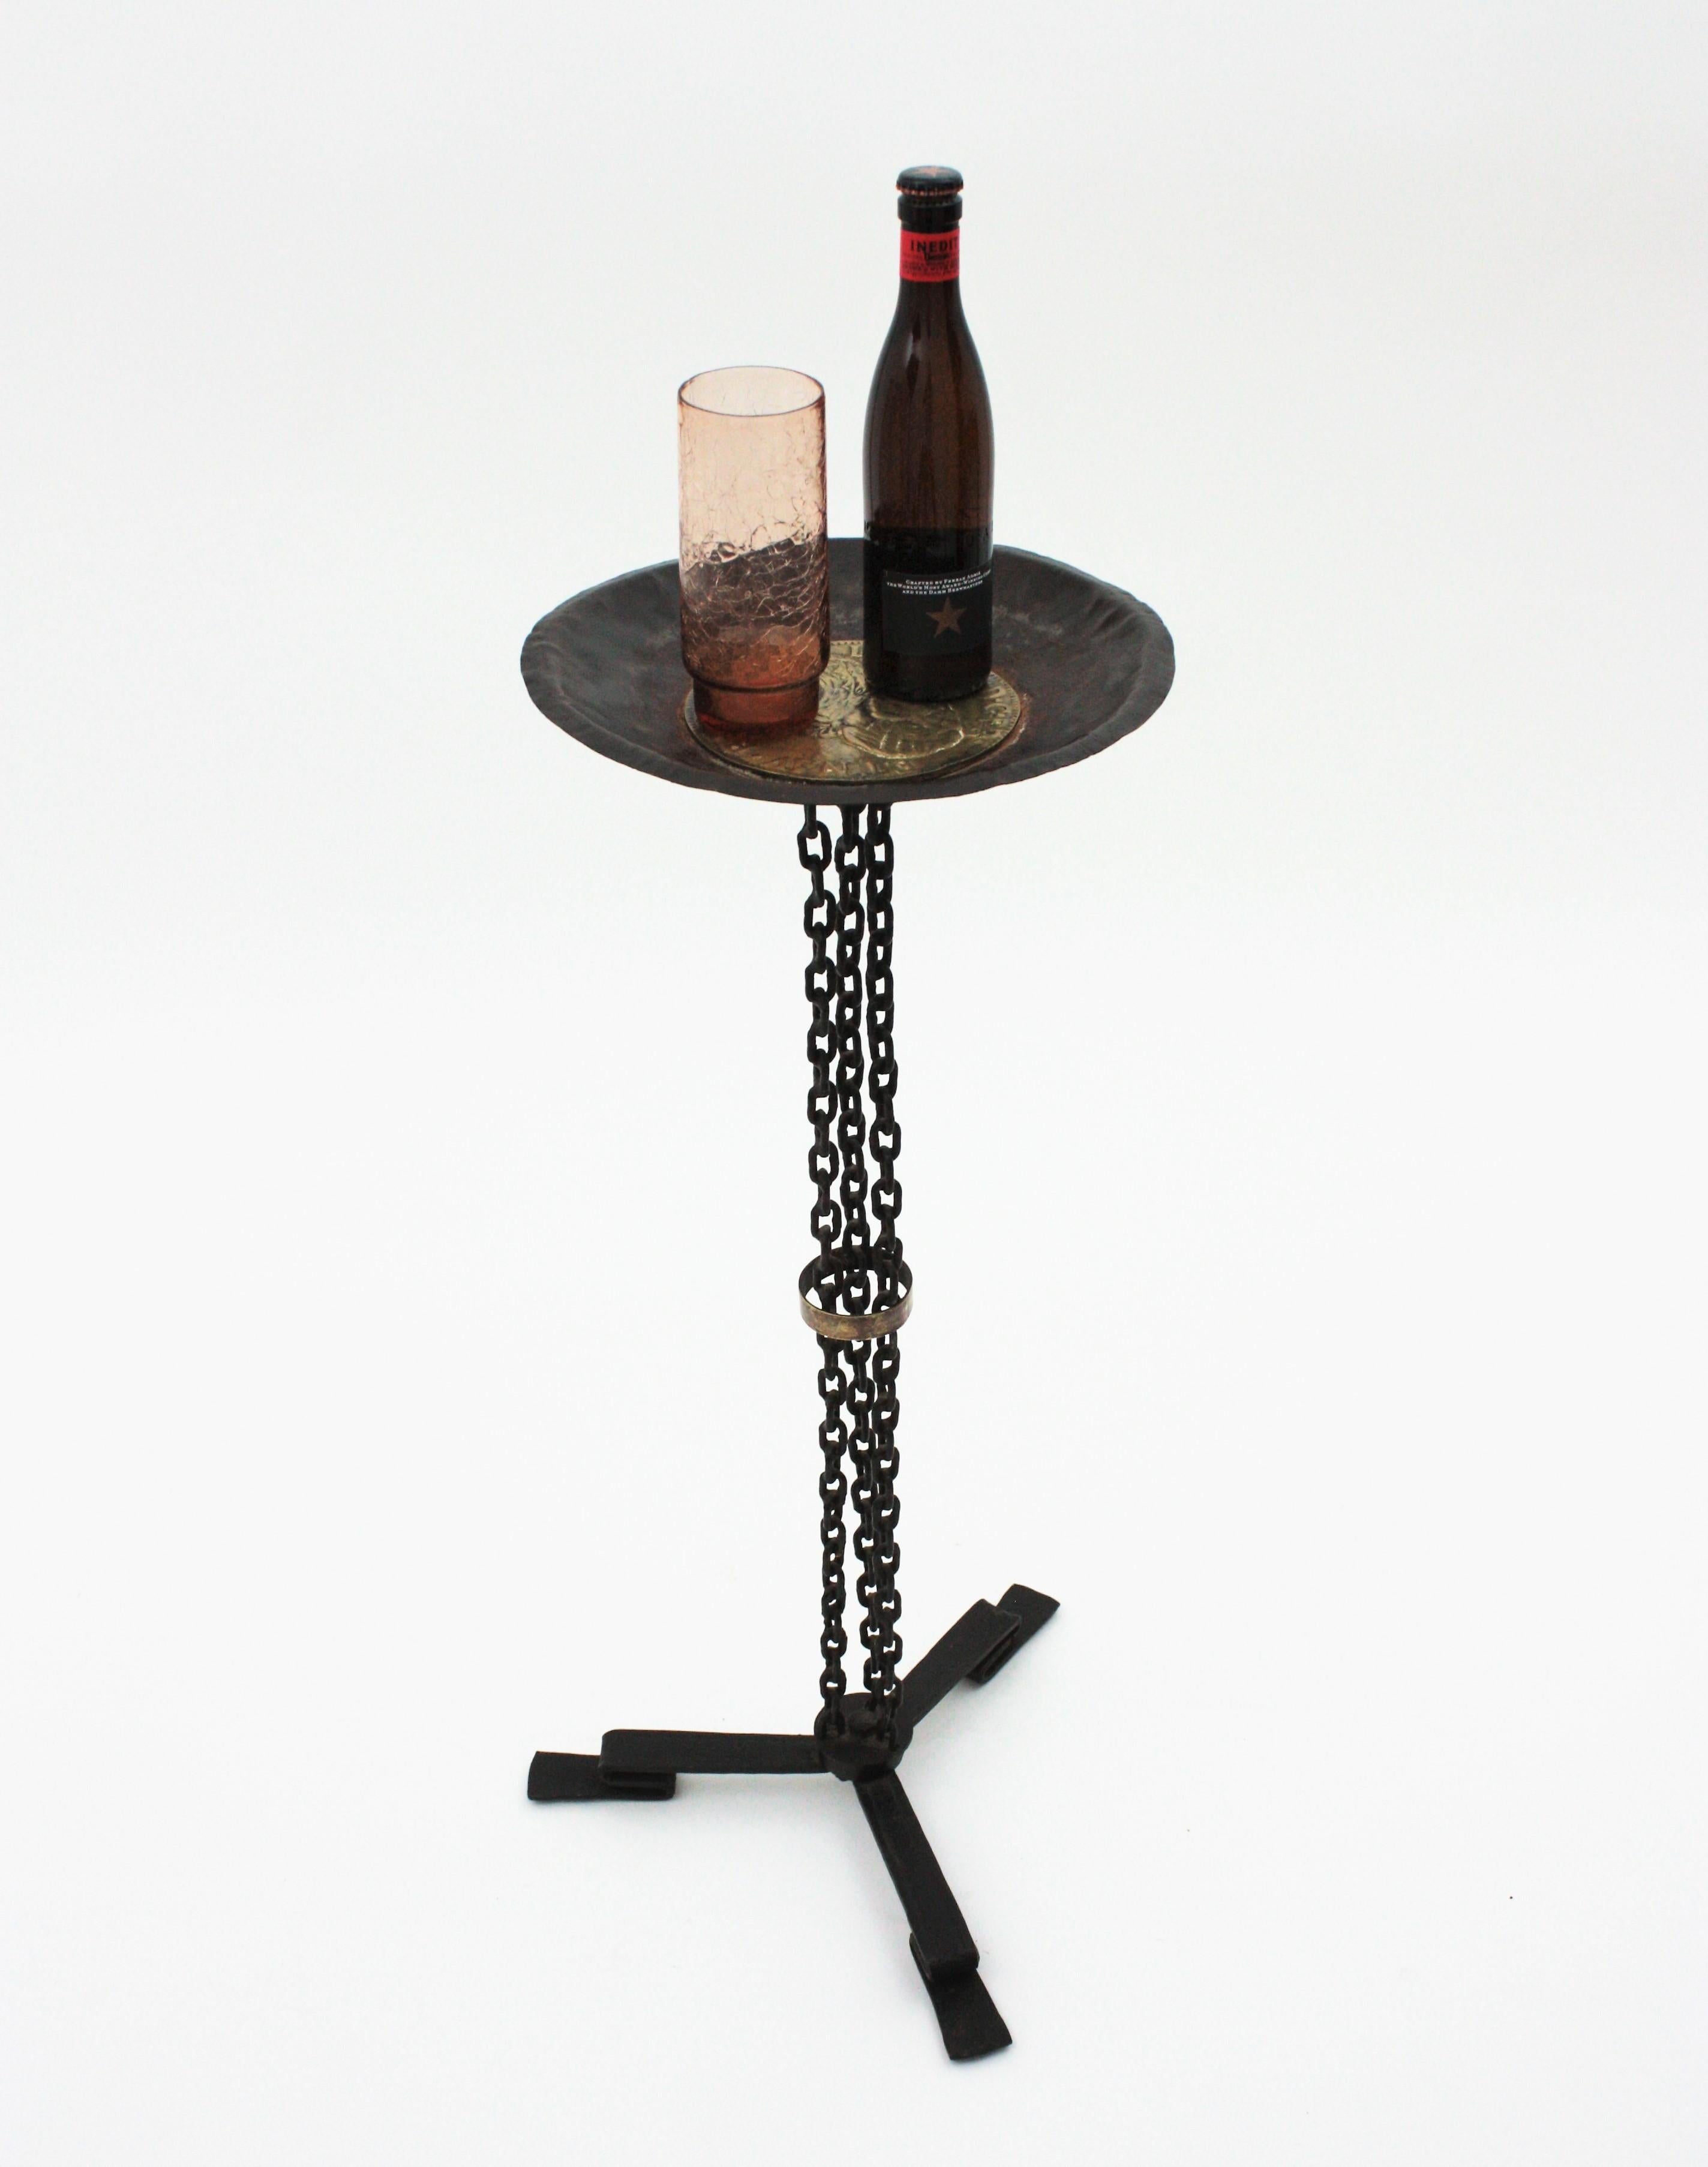 Chain Link End Table or Stand in hand forged iron with brass coin decorative panel. France, 1930s
This colonial revival pedestal table or stand features a base with 3 iron chains standing on tripod feet. The top is adorned by a brass large Louis